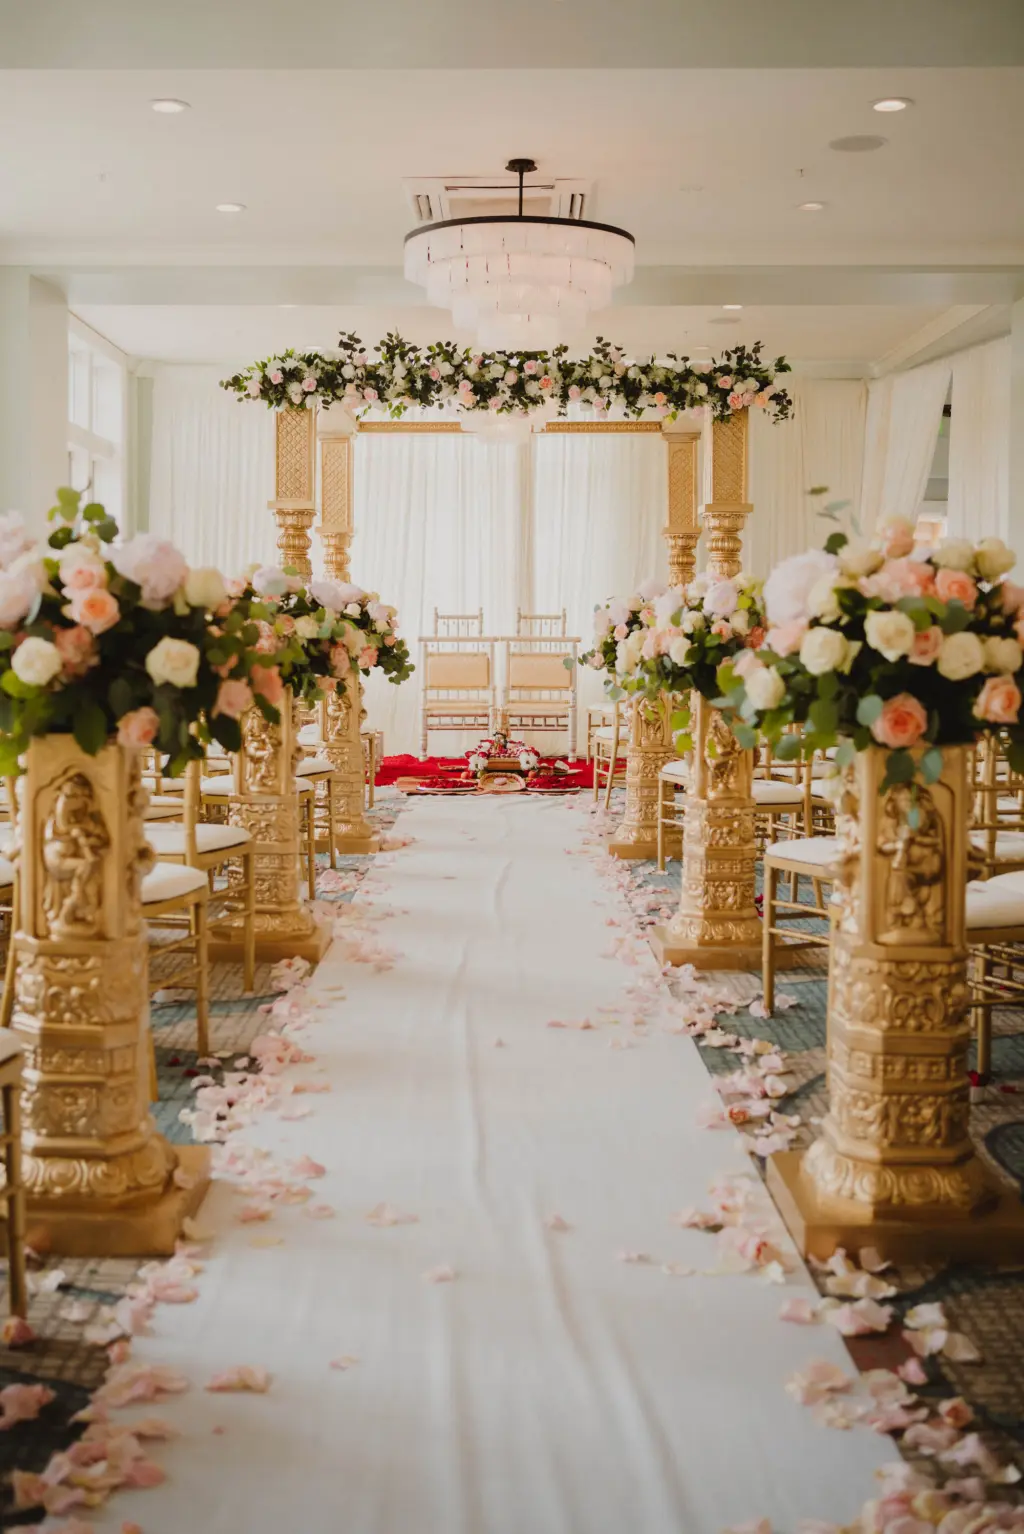 Blush and Gold Indian Wedding Ceremony | Gujarati Mandap Altar Inspiration | Pink and White Roses Aisle Decor with Greenery Ideas | Dunedin Venue The Fenway